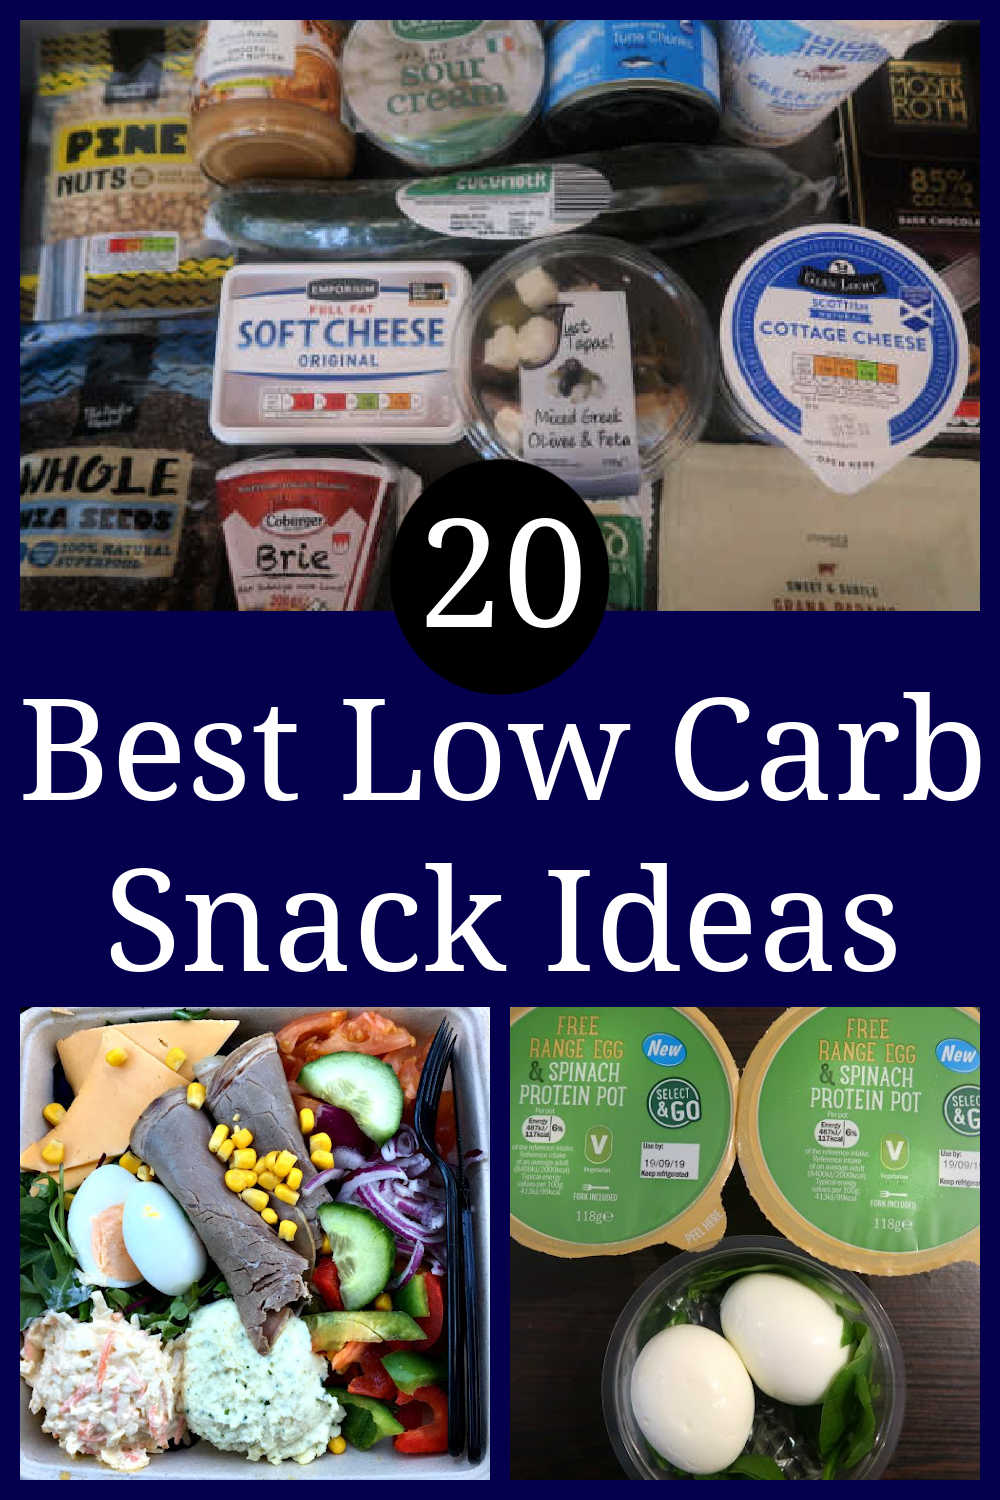 Best Low Carb Snacks – 20 Easy Keto Friendly Snack Ideas to eat – including foods you can buy and healthy recipes to help keep you energized and stay in ketosis.